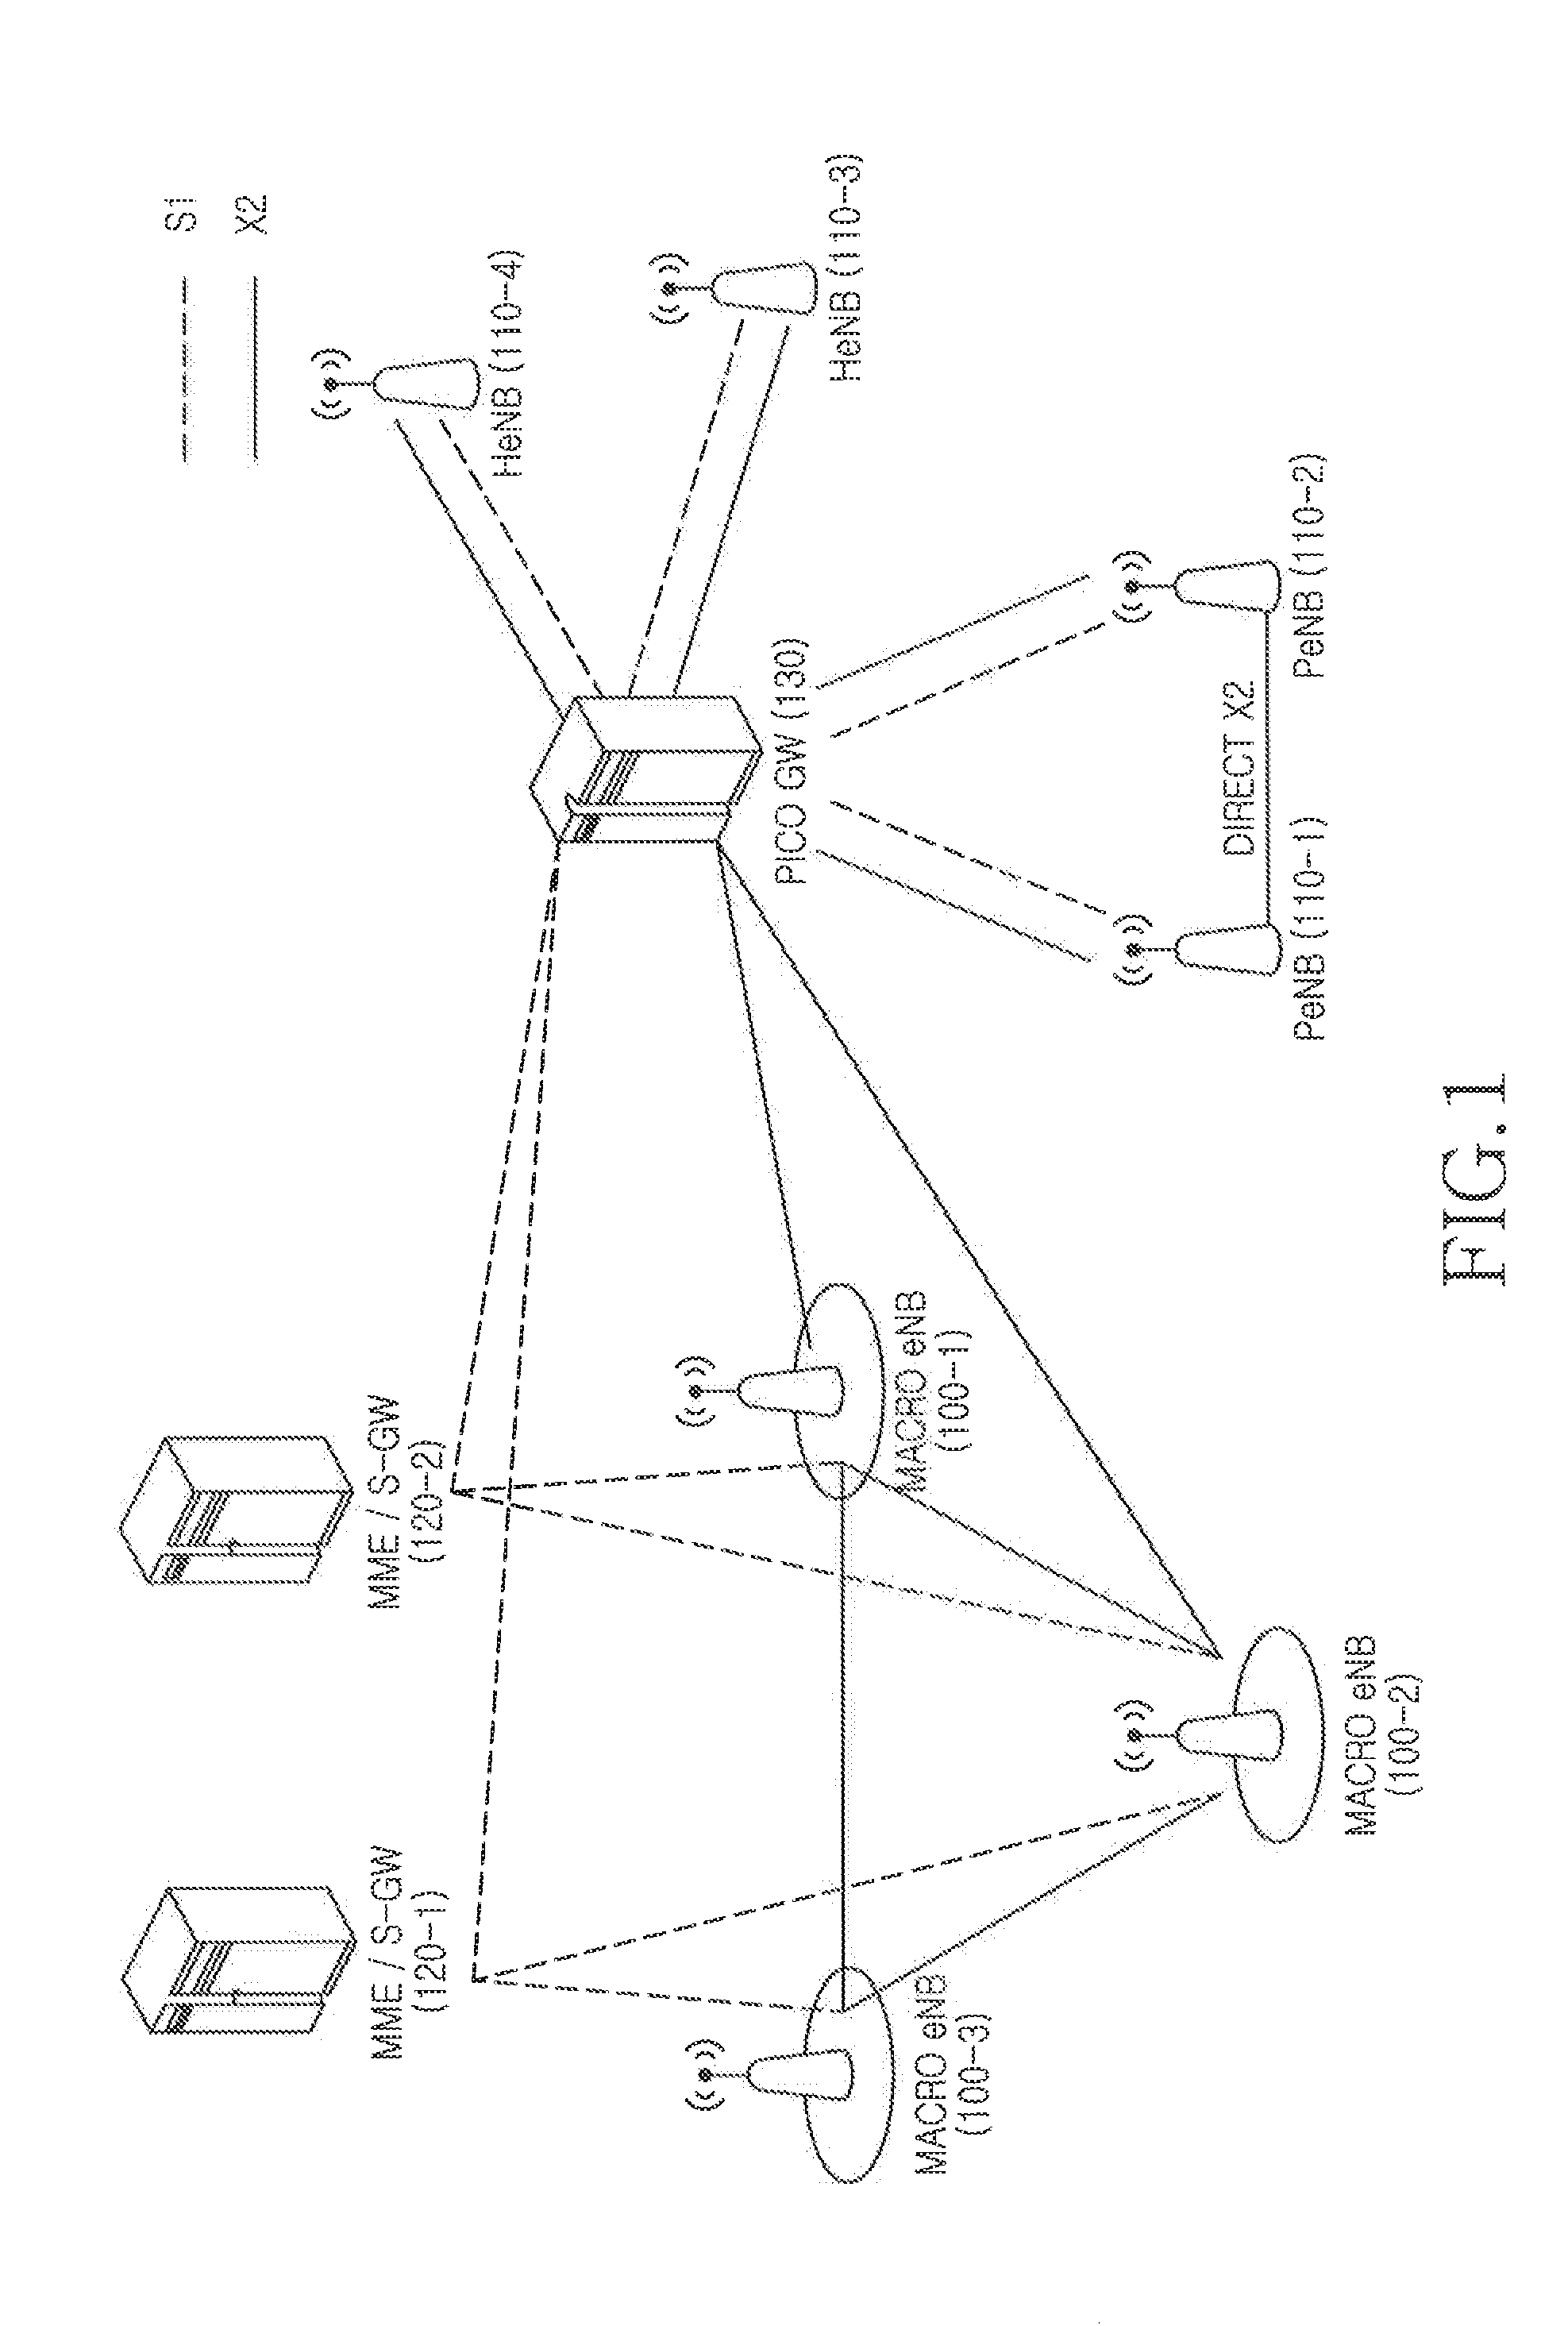 Interworking method and device between base stations using gateway in wireless communication system of hierarchical cell structure